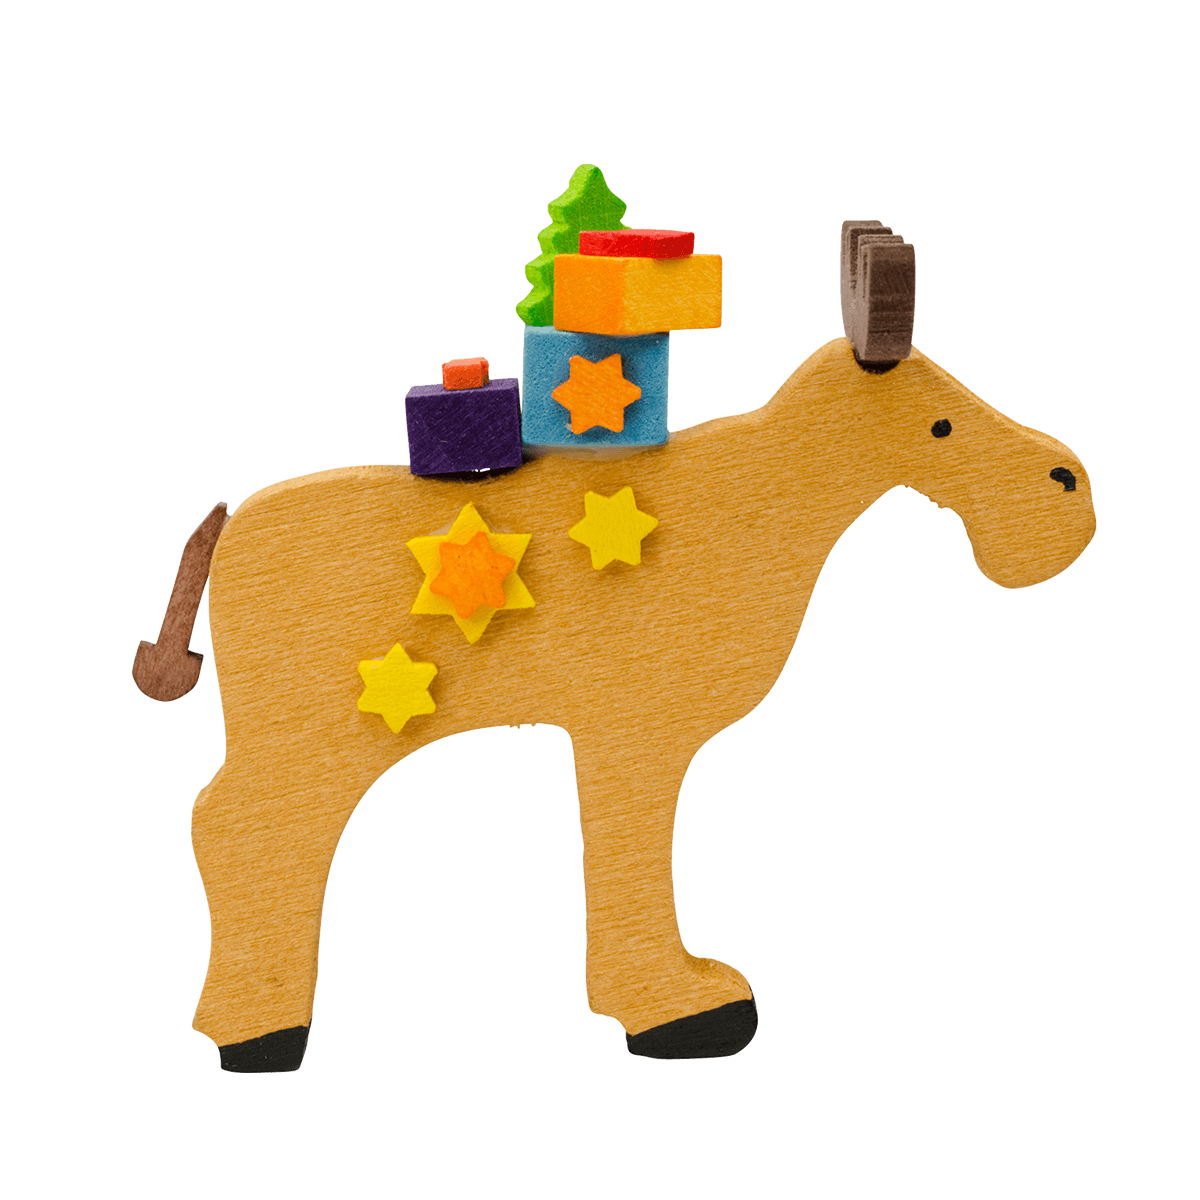 Moose with Toys Ornament with gifts